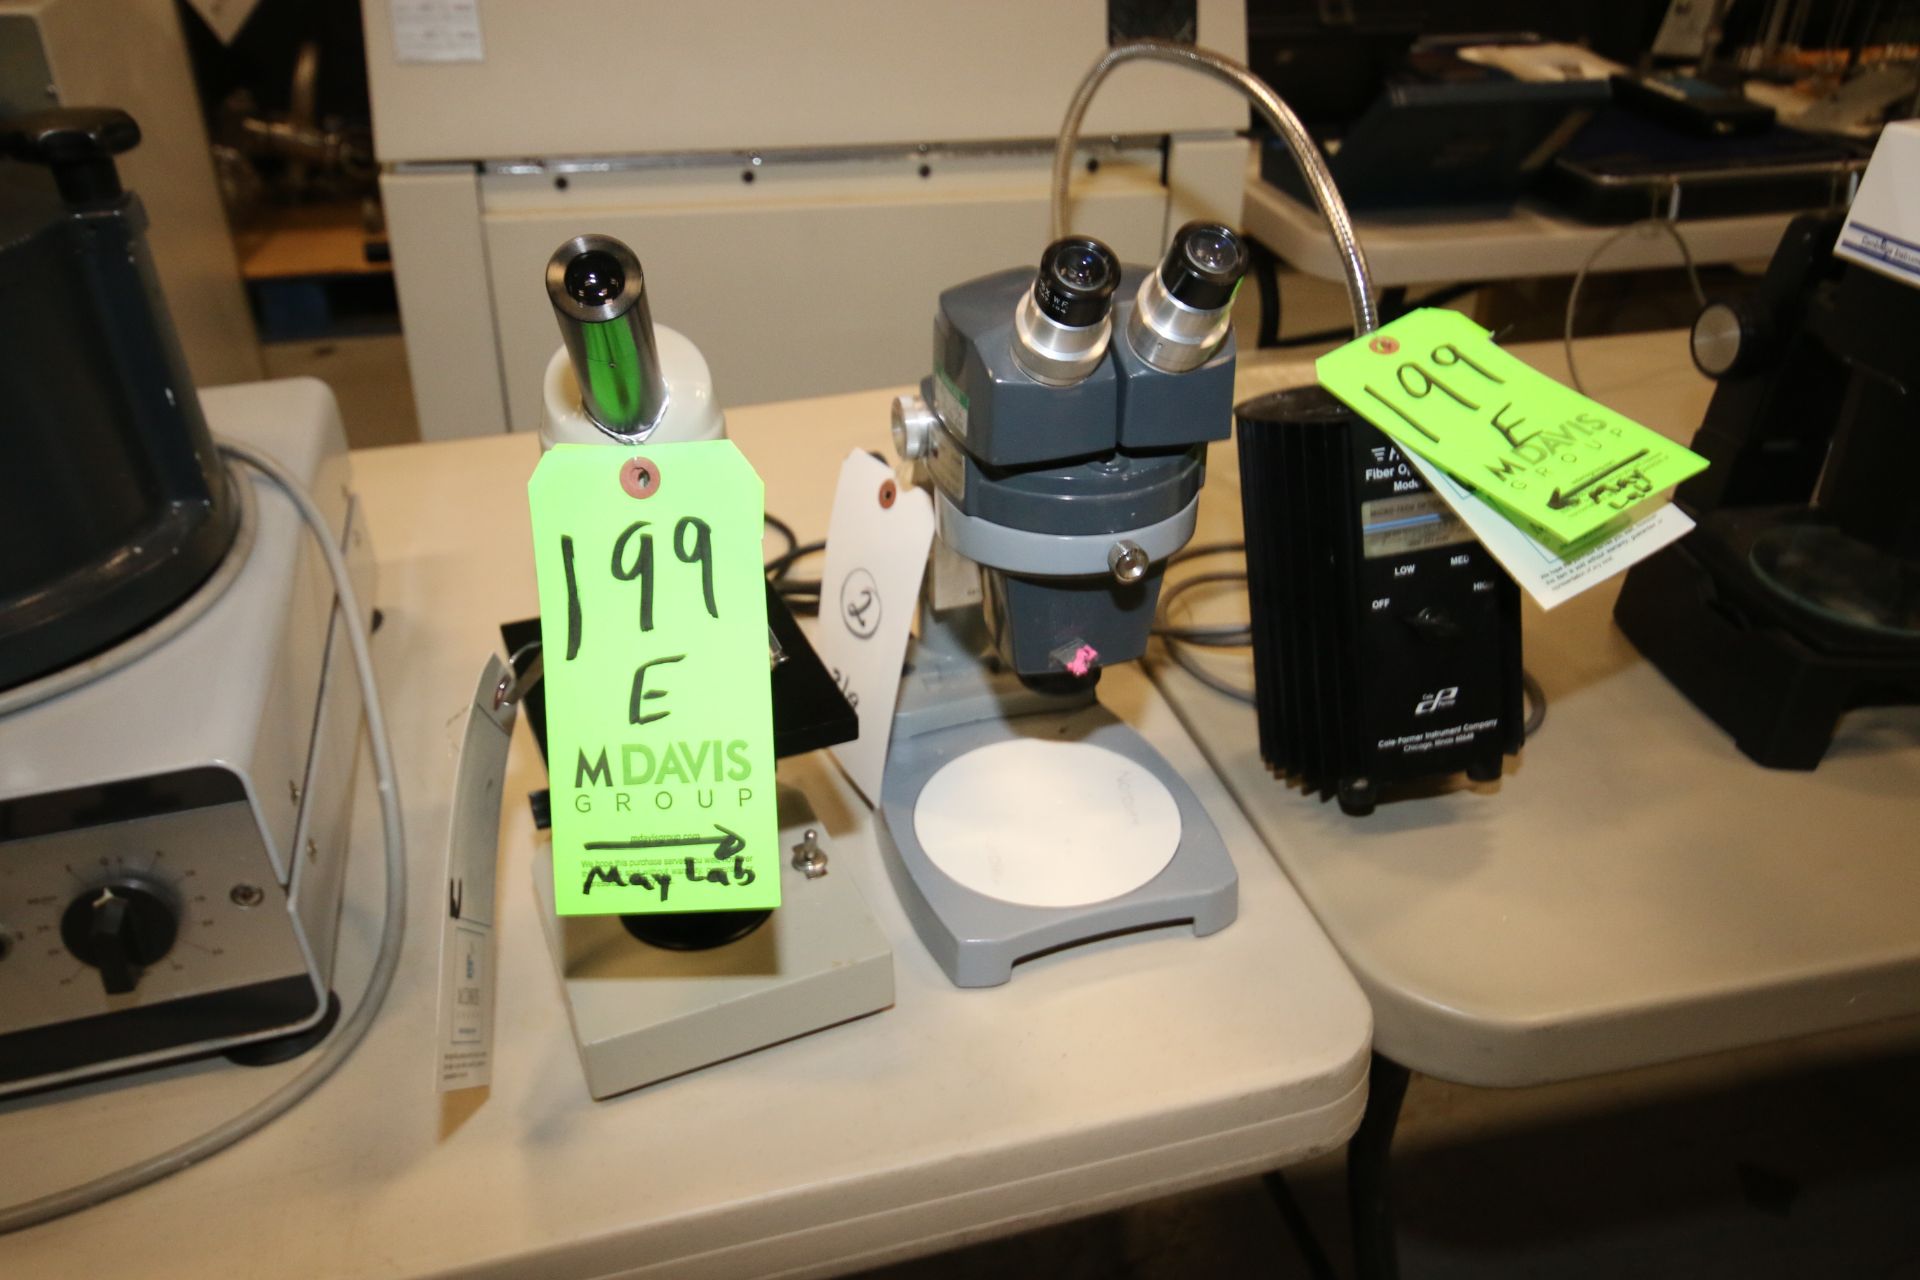 Lot of (2) Stereo Star and Other Microscopes, with Fiber Optical Light - Image 2 of 2